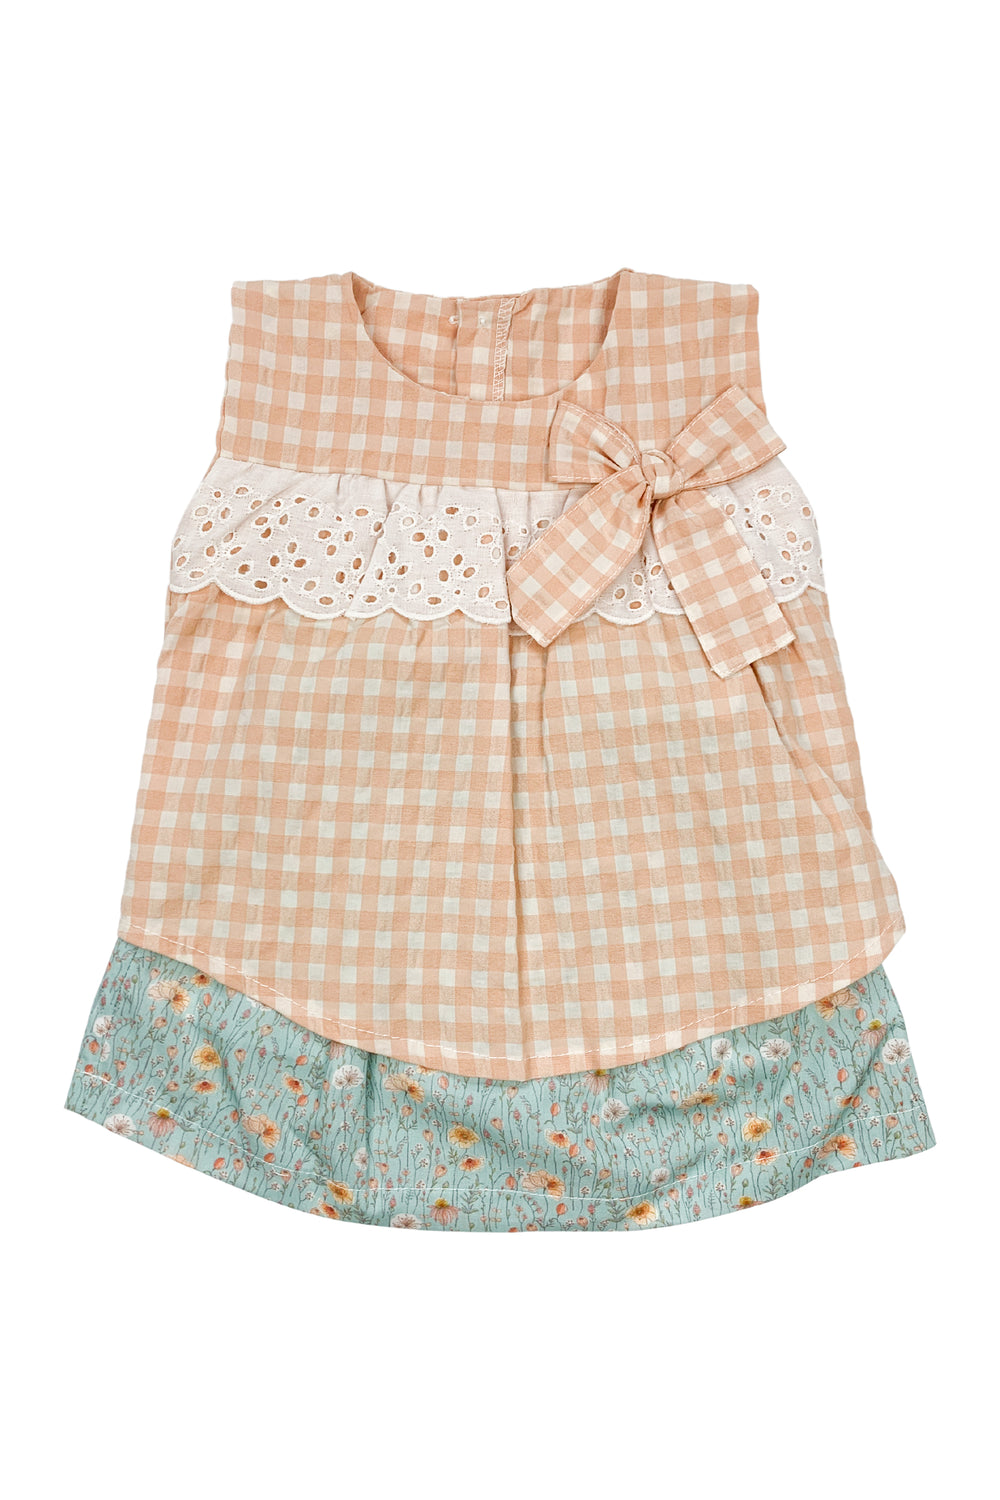 Valentina Bebes "Meadow" Peach Gingham Blouse & Sage Floral Skirt | Millie and John